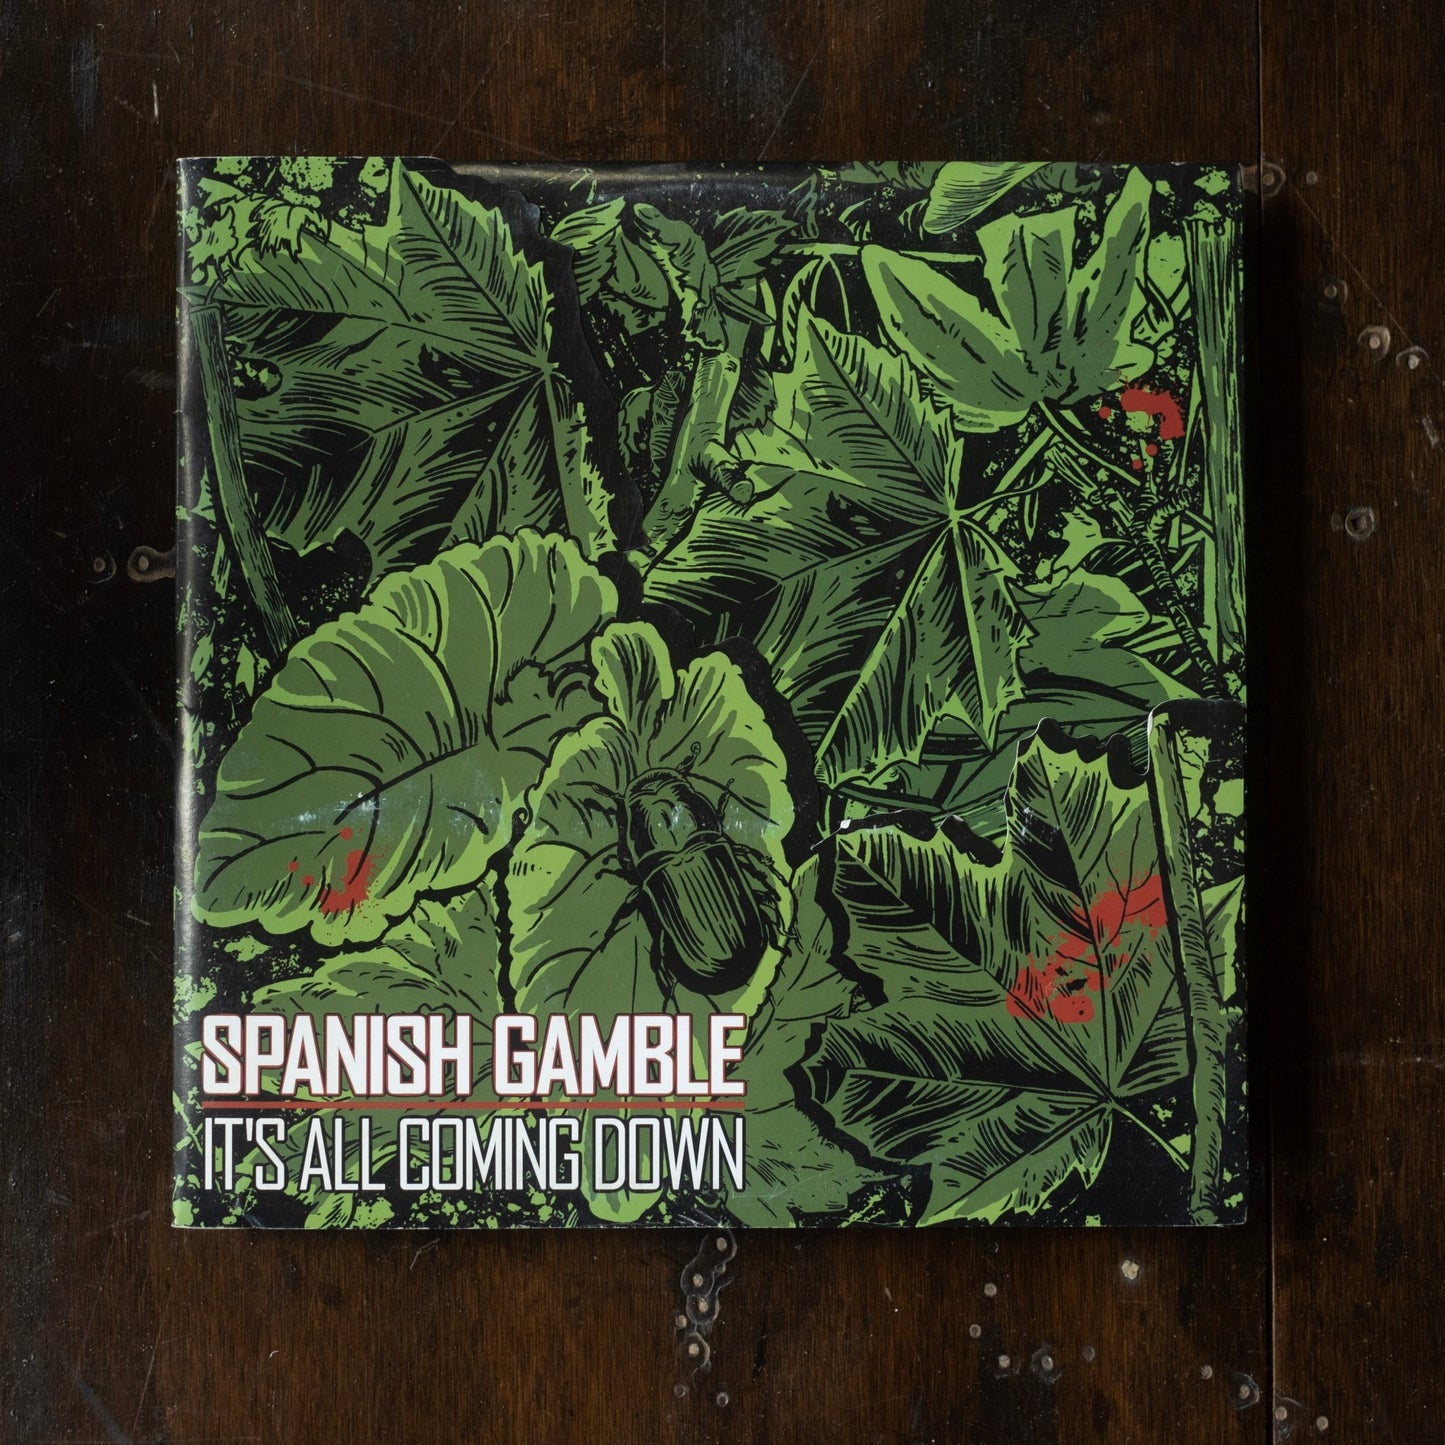 Spanish Gamble ‎– It's All Coming Down (Pre-Loved) - NM - Spanish Gamble ‎– It's All Coming Down - LP's - Yellow Racket Records